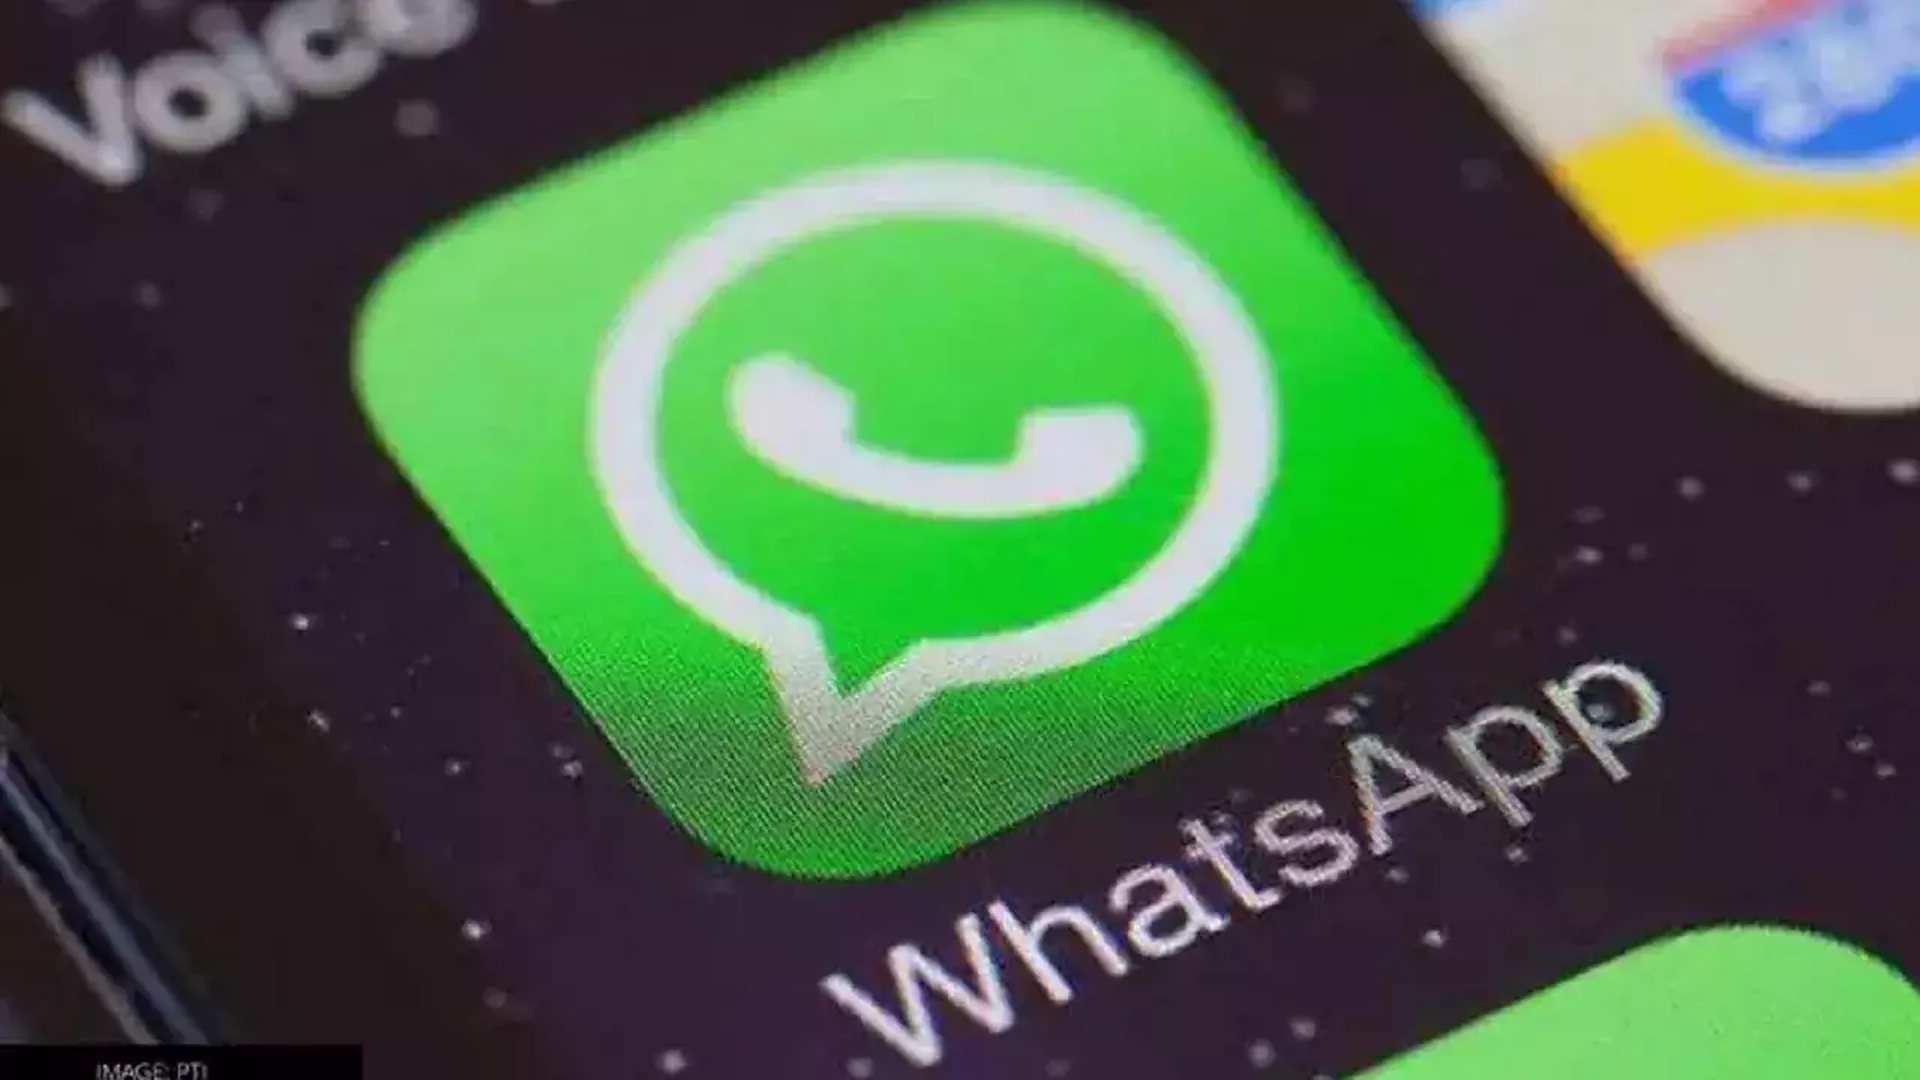 Whatsapp not working mobile list has been revealed and according to it, starting this week, some Android and iPhone devices will no longer support WhatsApp....